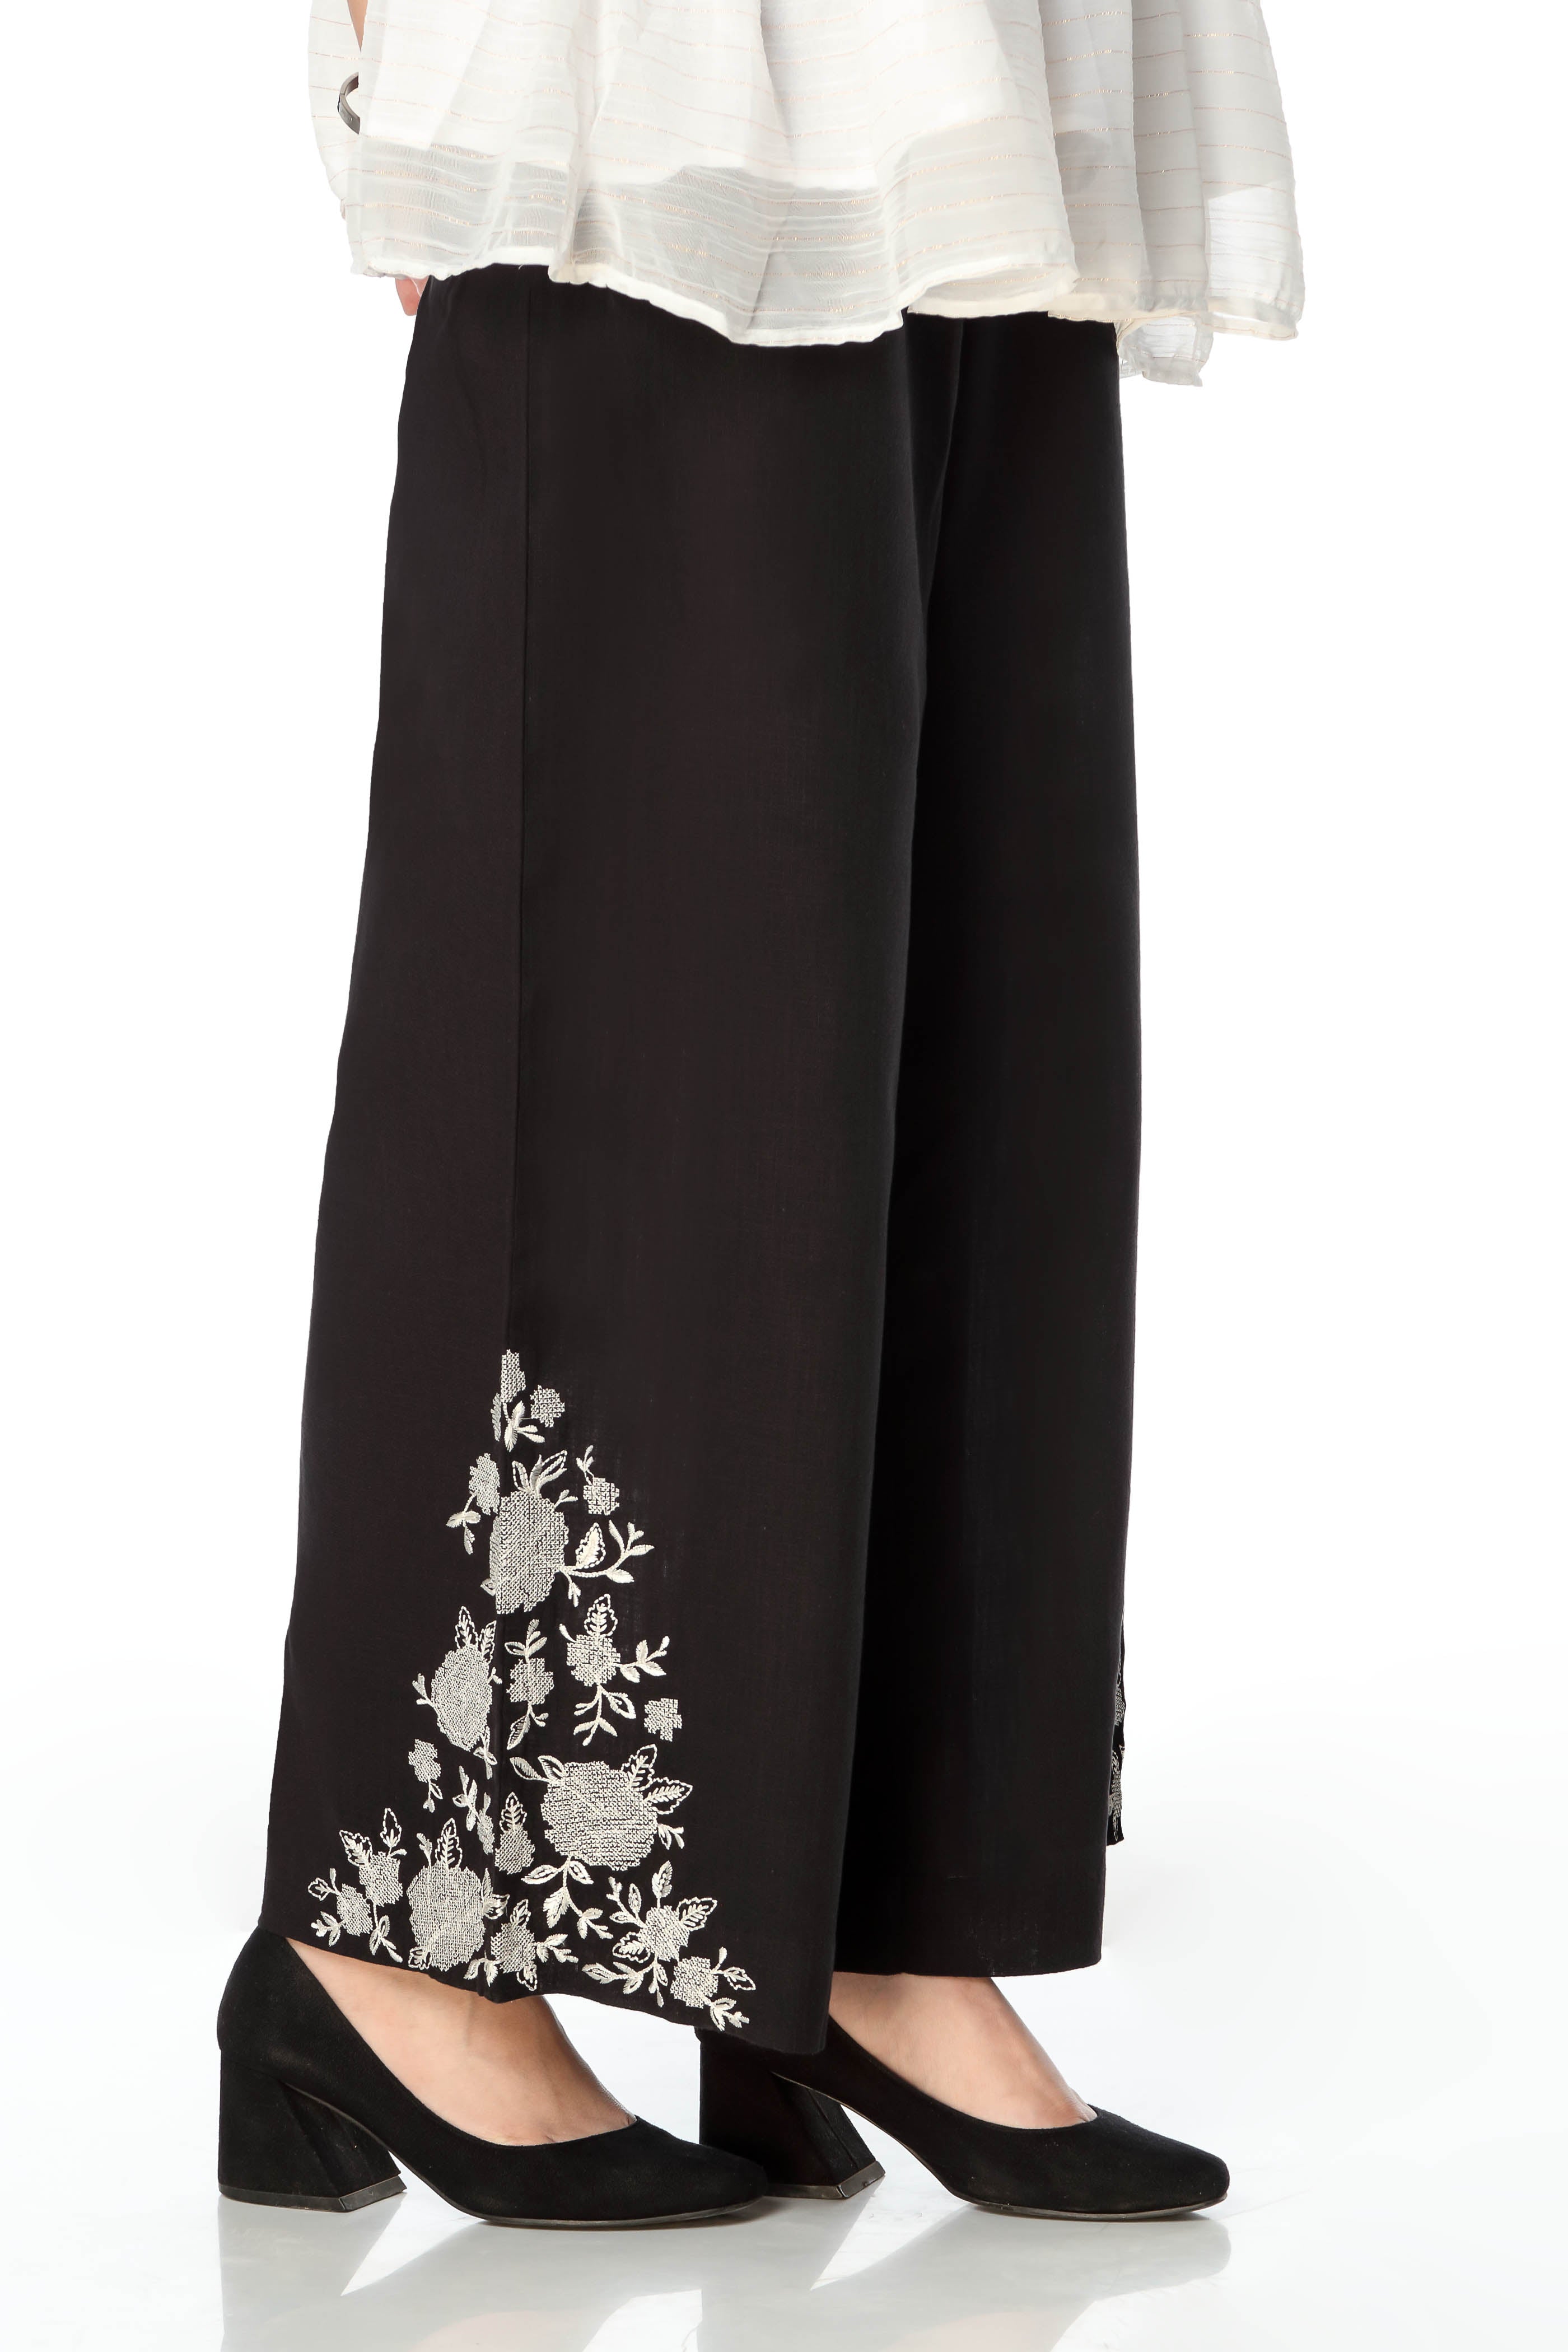 Embroidered Wide Leg Trousers (SSGFT-021)